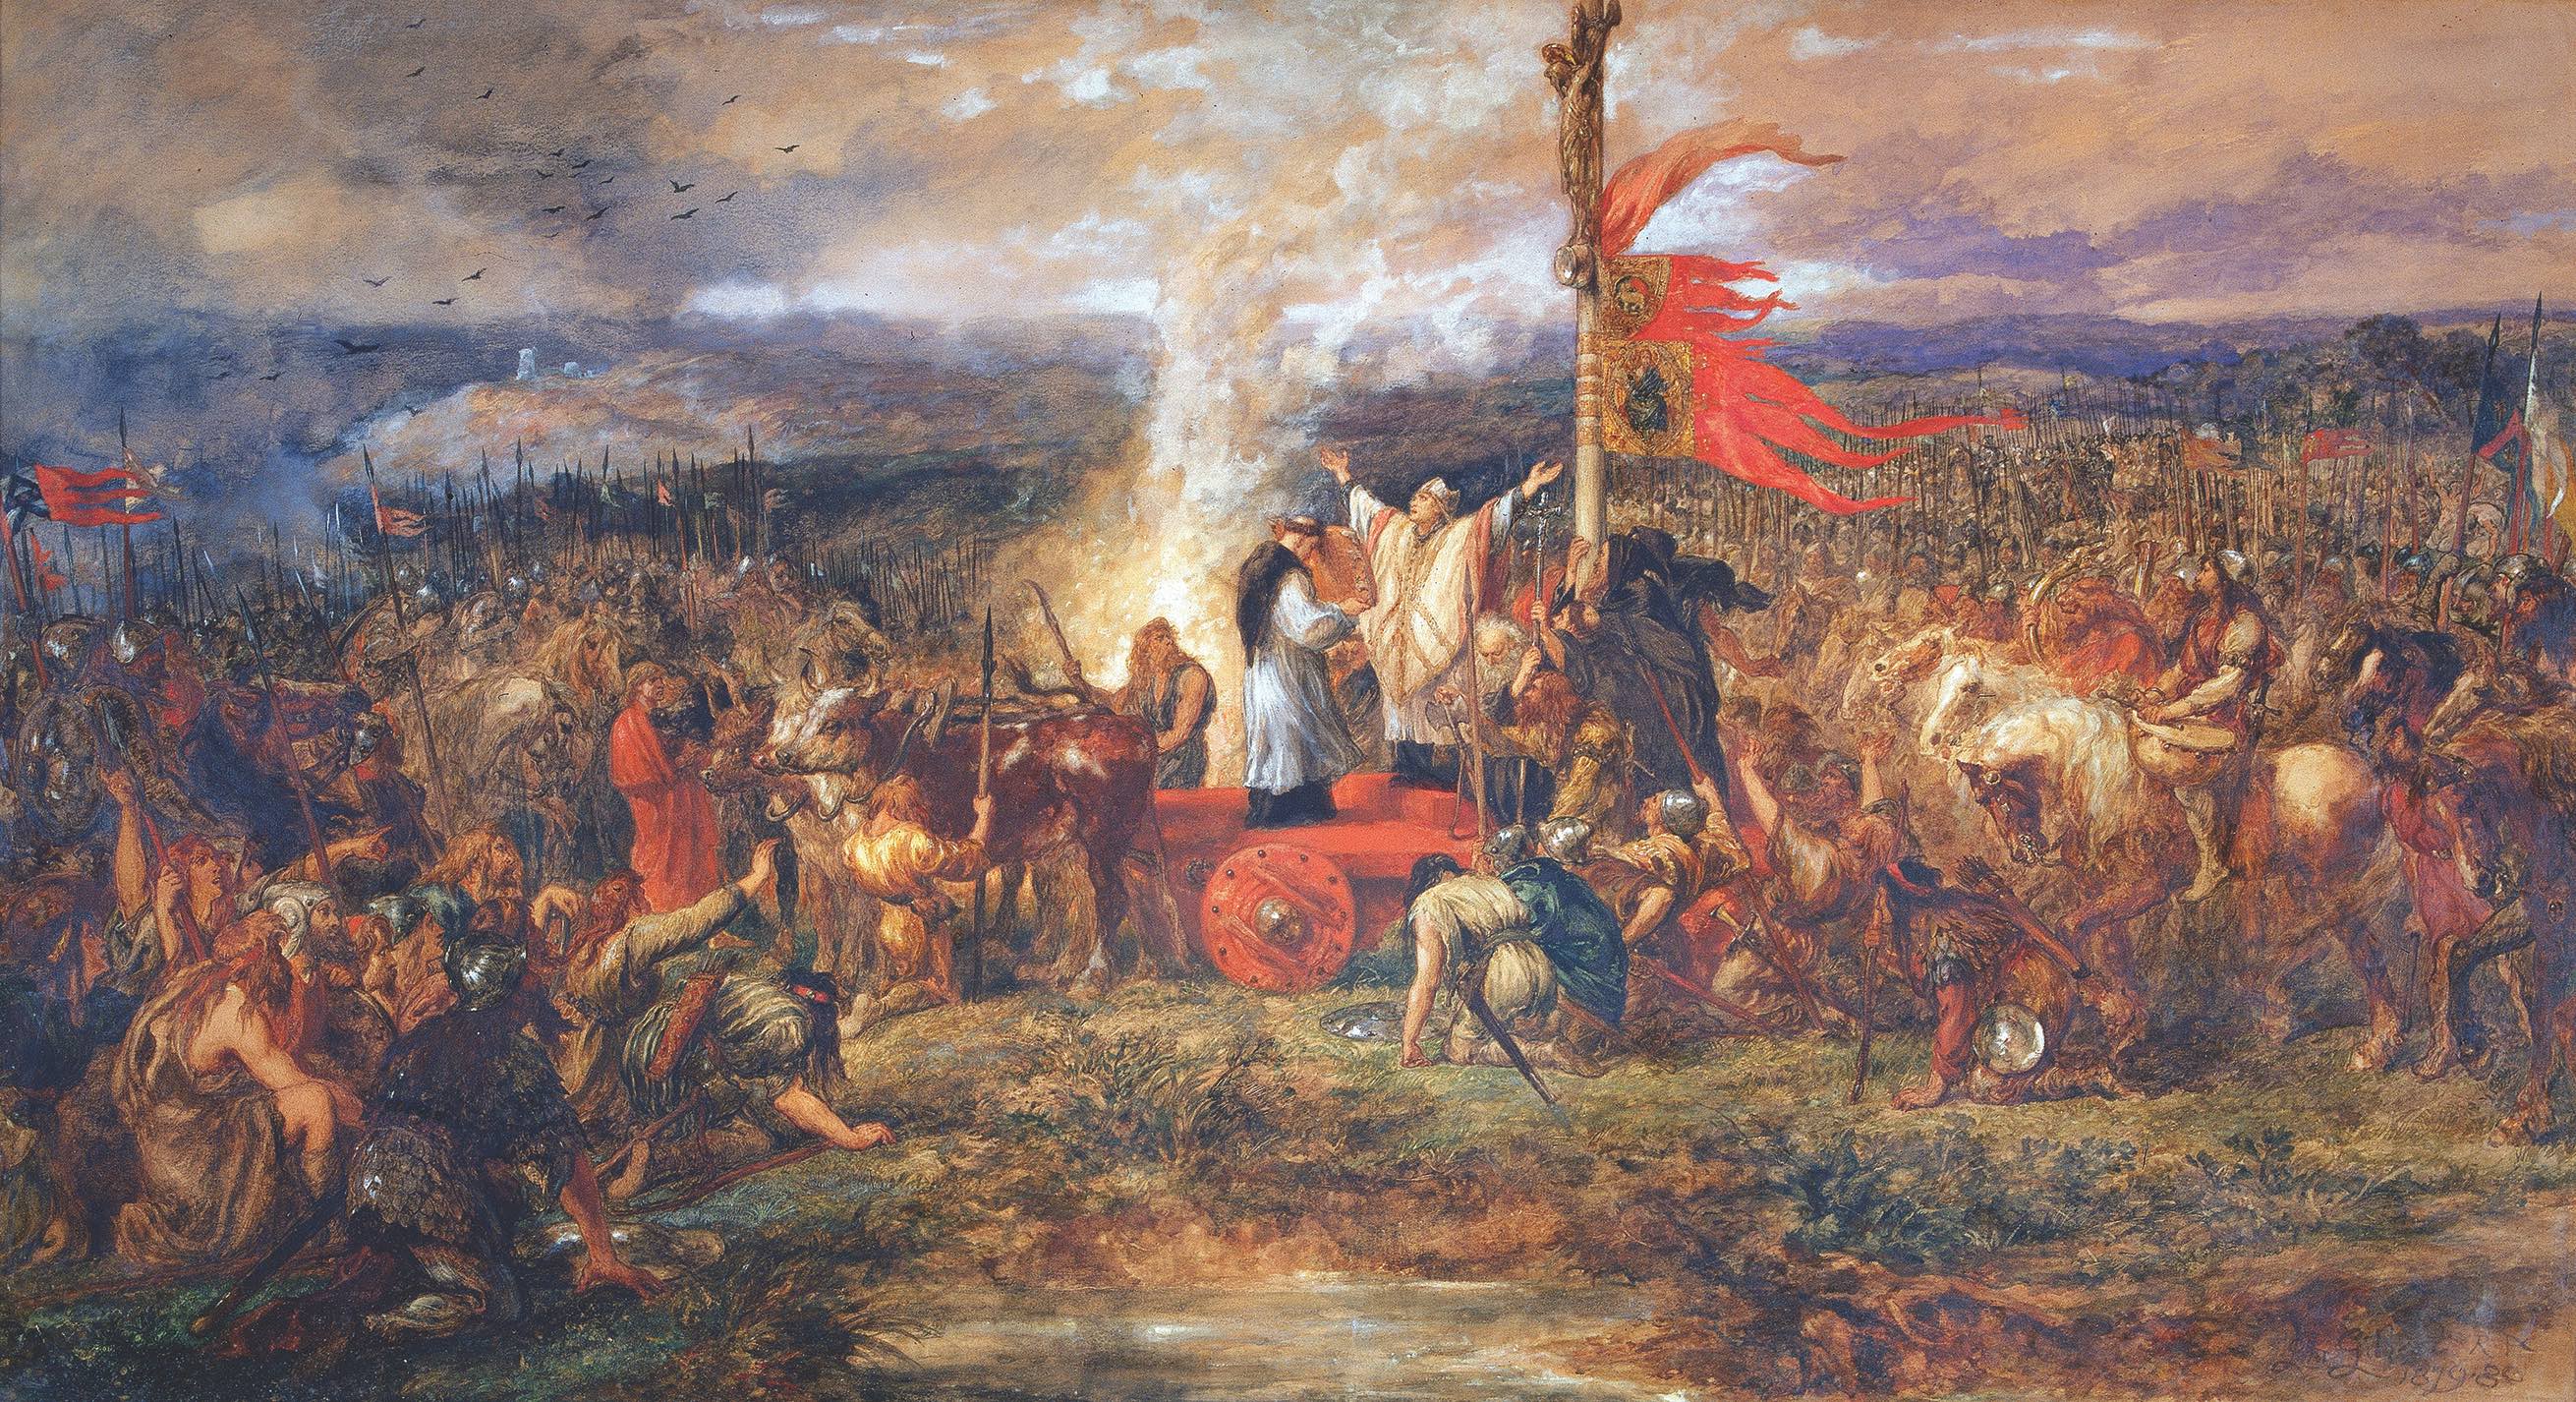 The Battle of the Standard / Guildhall Art Gallery